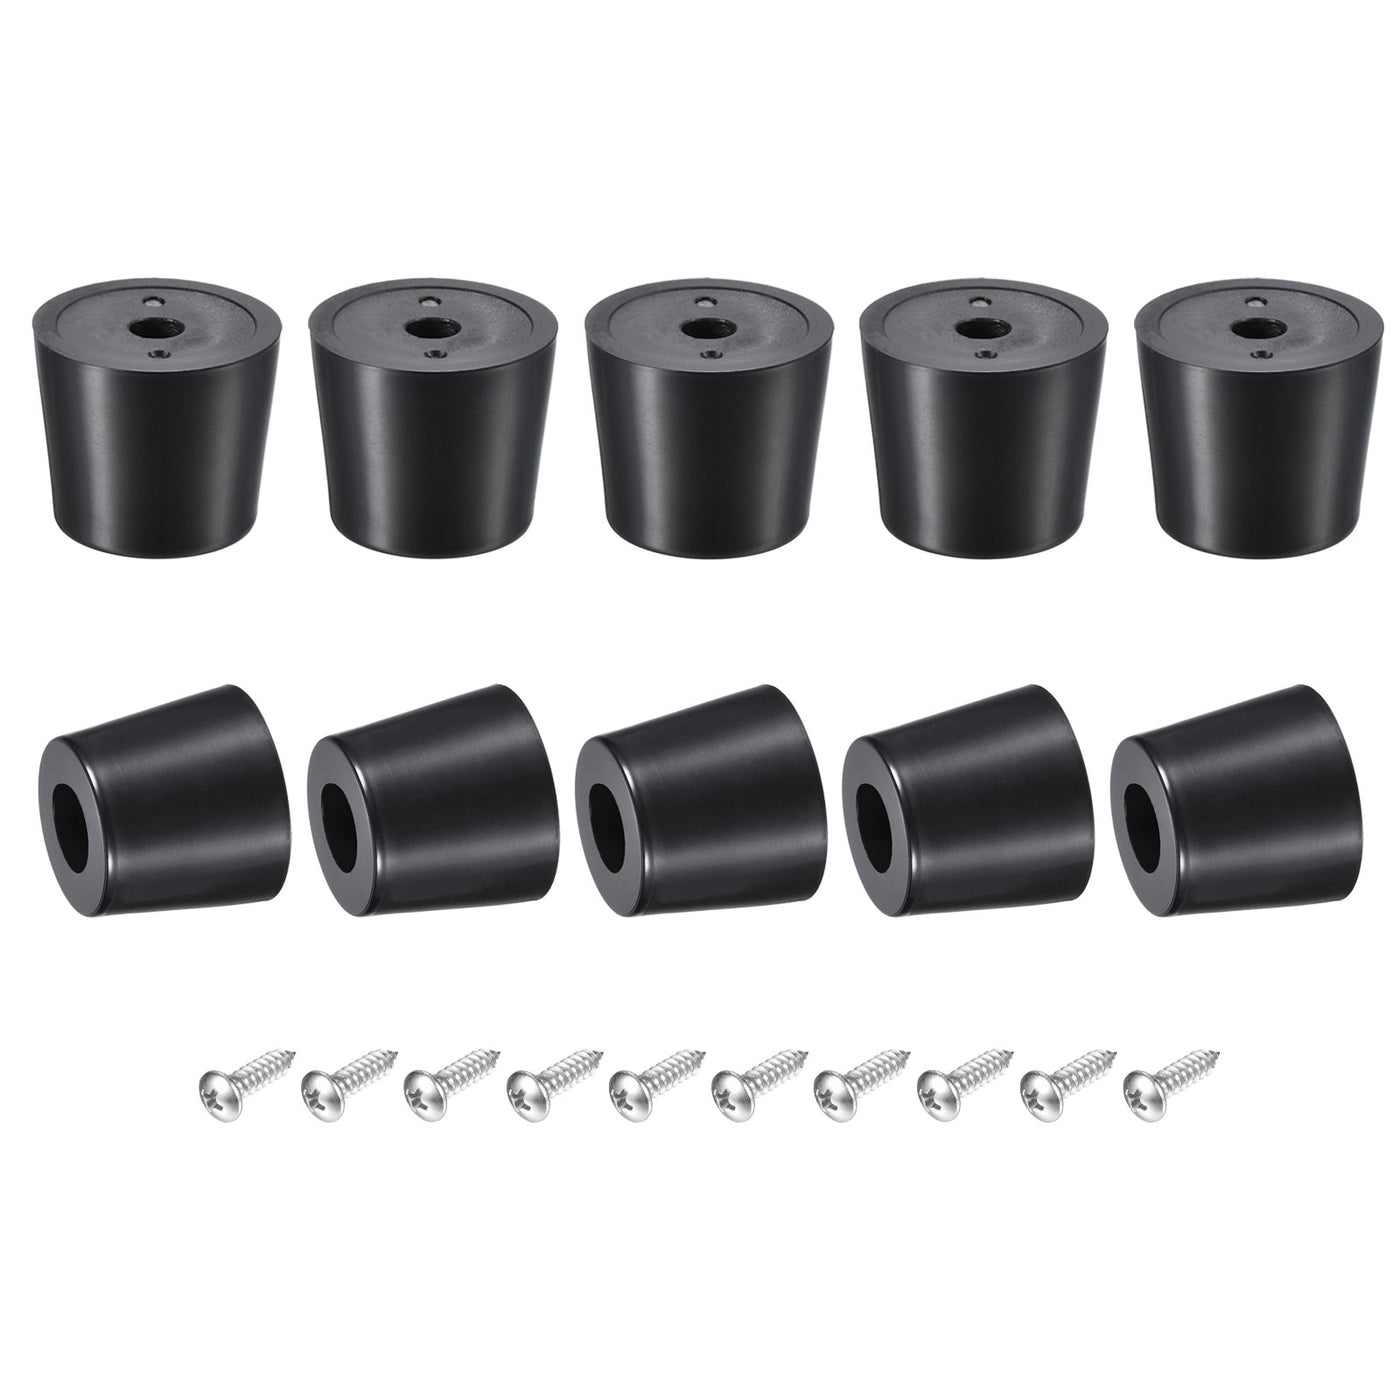 uxcell Uxcell Rubber Bumper Feet, 0.79" H x 0.98" W Round Pads with Stainless Steel Washer and Screws for Furniture, Appliances, Electronics 16 Pcs